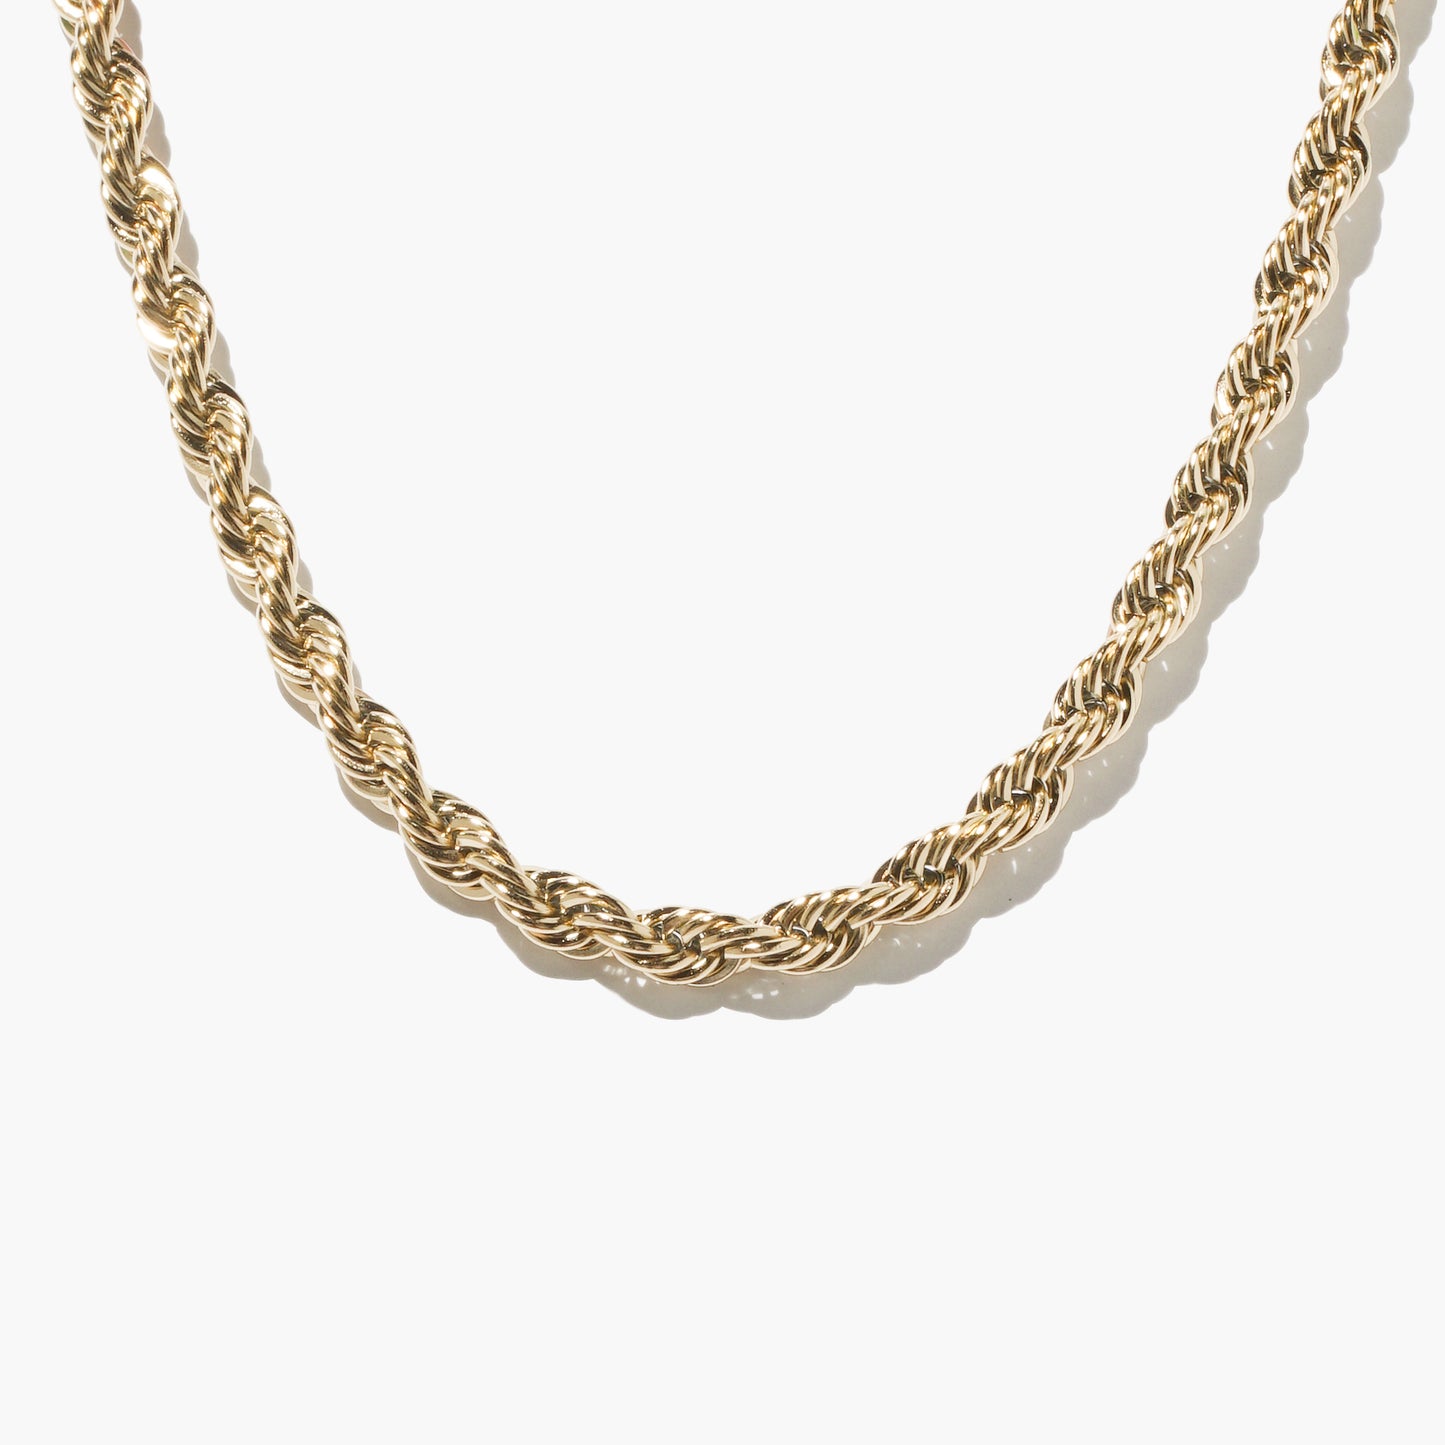 Thin gold filled rope chain necklace | VIE EN BLEU